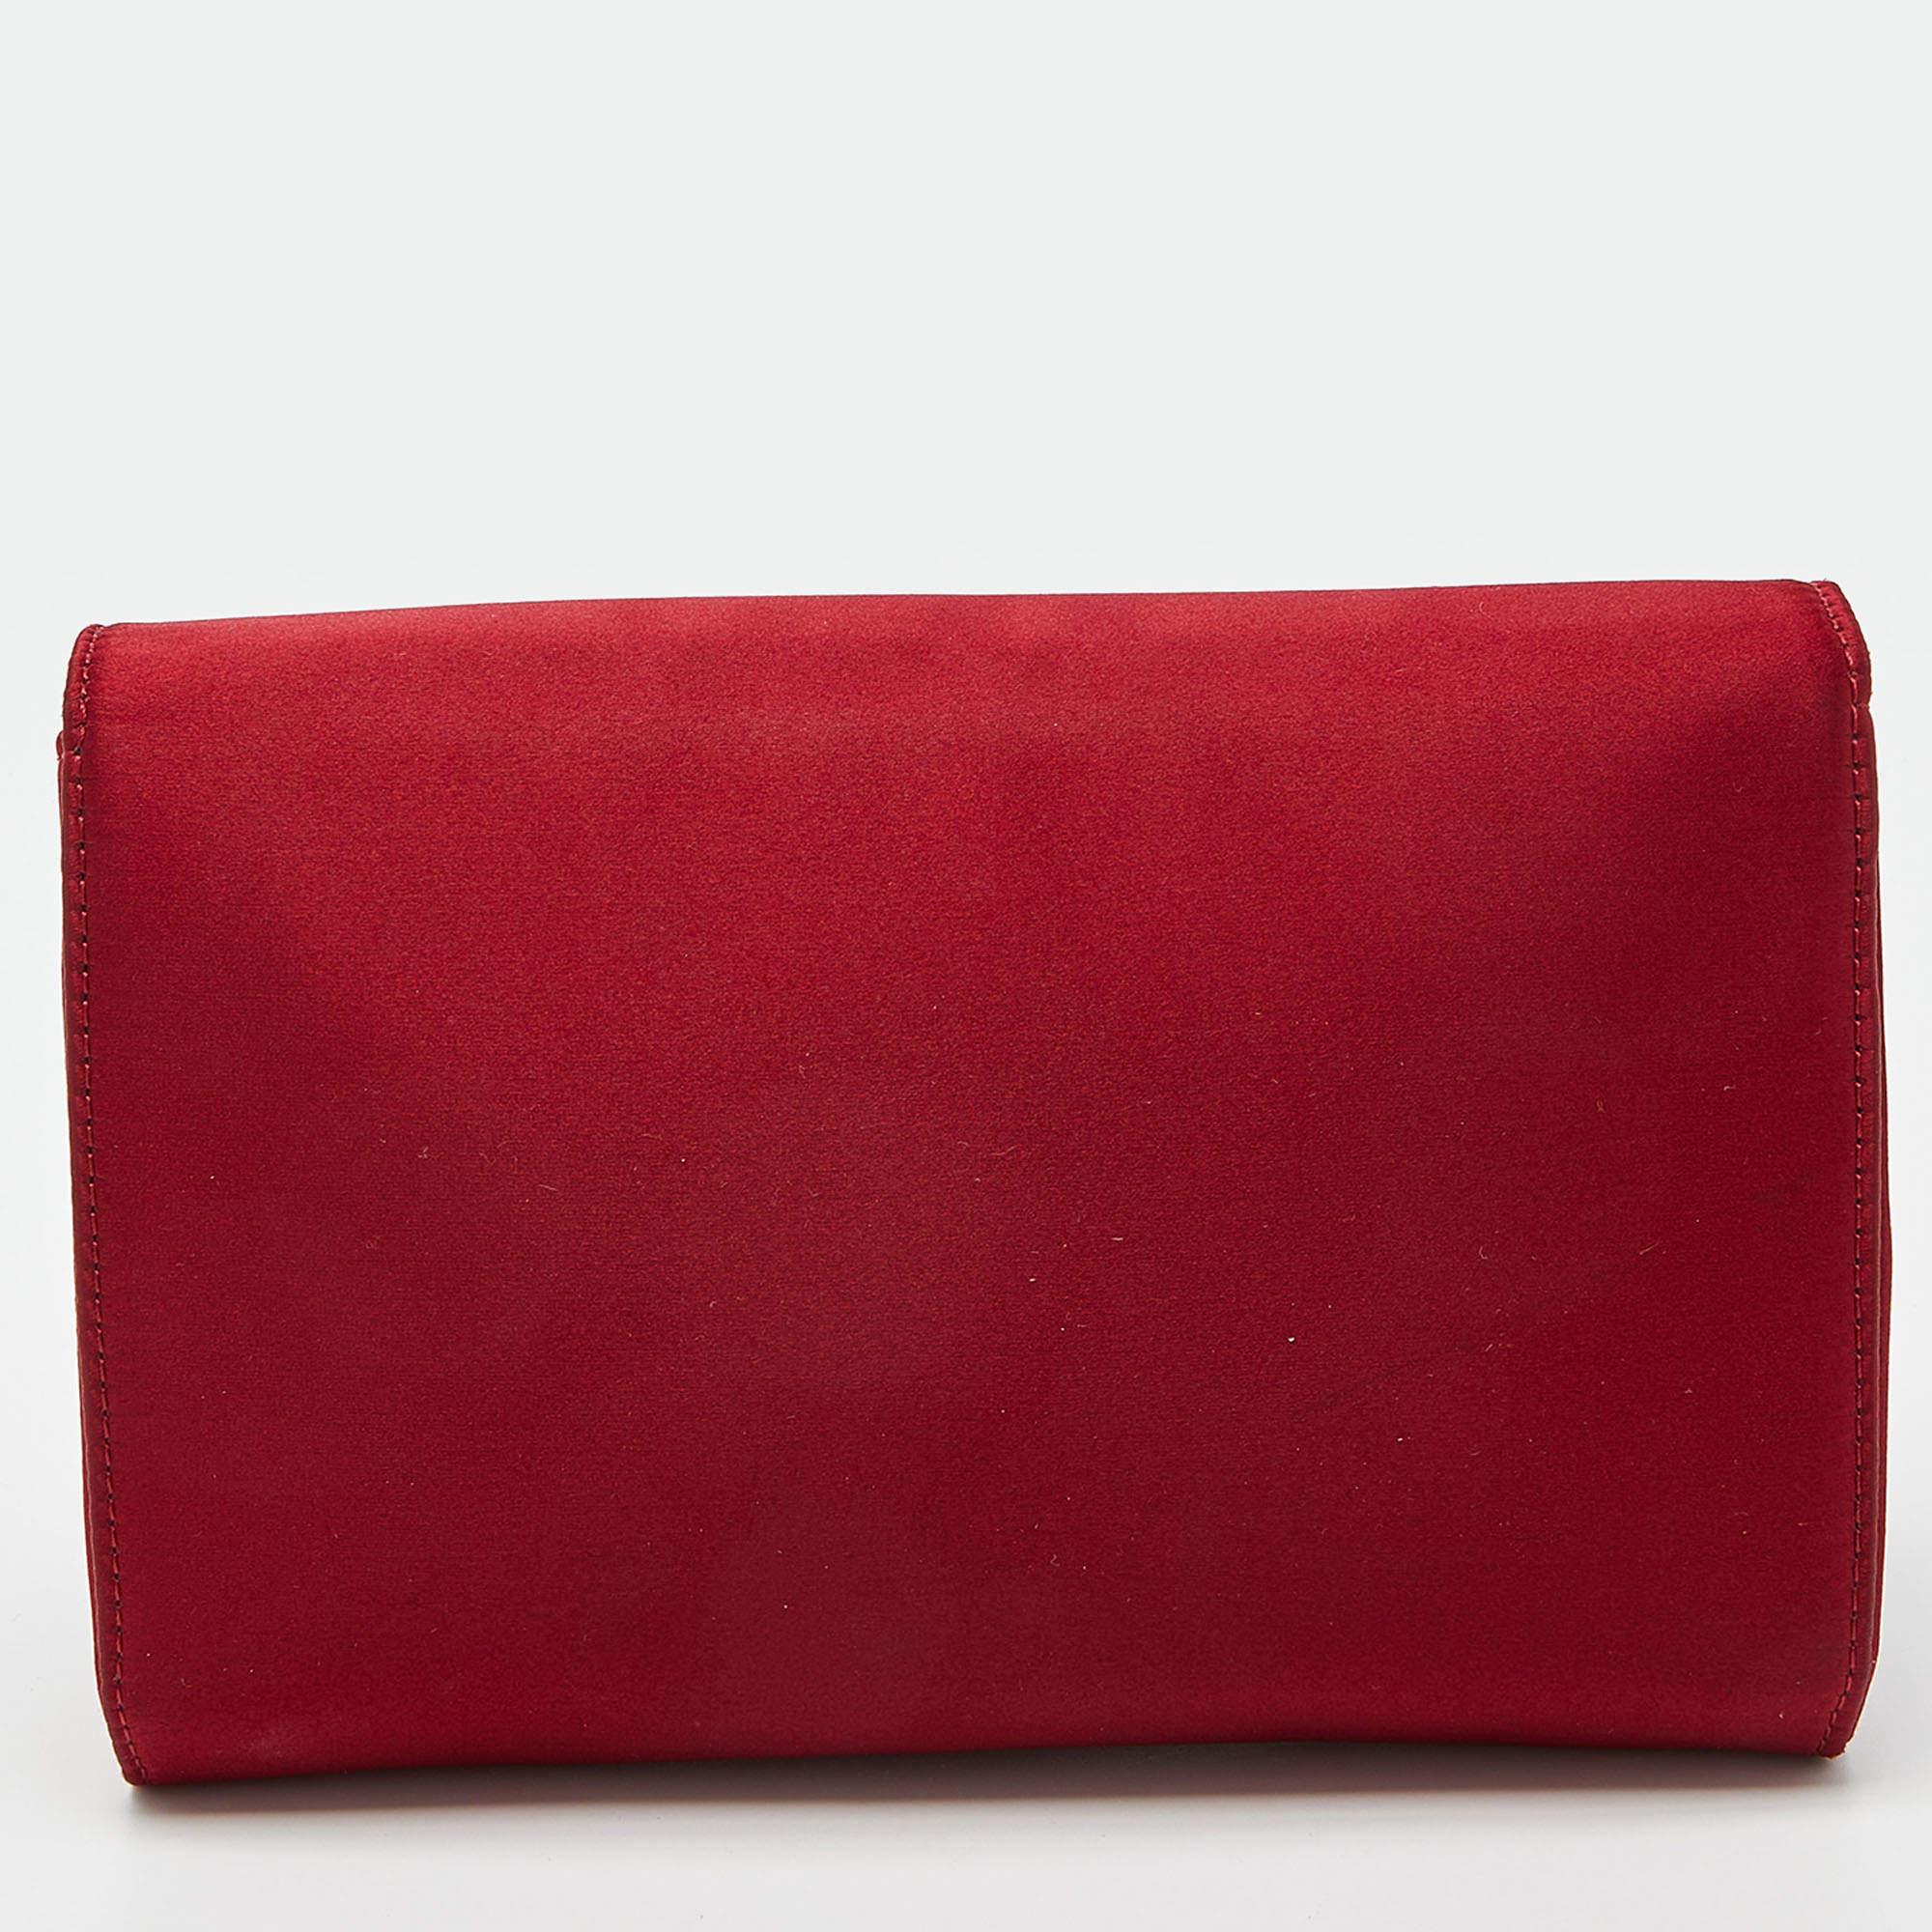 This clutch from Versace is designed in a red satin body. It brings a Medusa-adorned flap to secure the interior which is lined with leather. It comes held by a gold-tone chain and is perfect for evenings.

Includes: Original Dustbag, Detachable